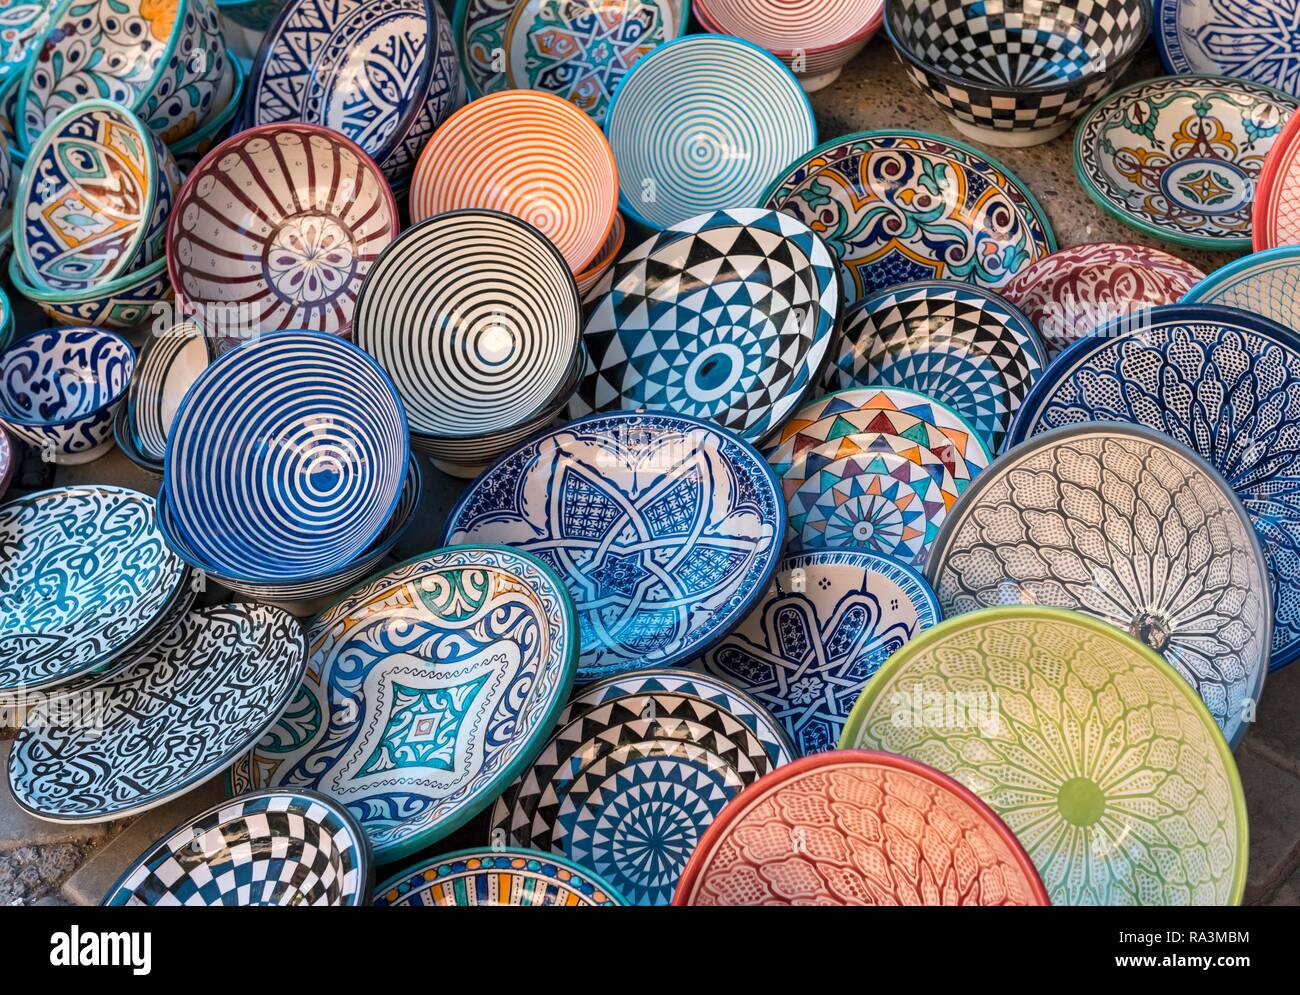 Painted ceramic plates on sale in Marrakech souks, Marrakech, Morocco Stock Photo